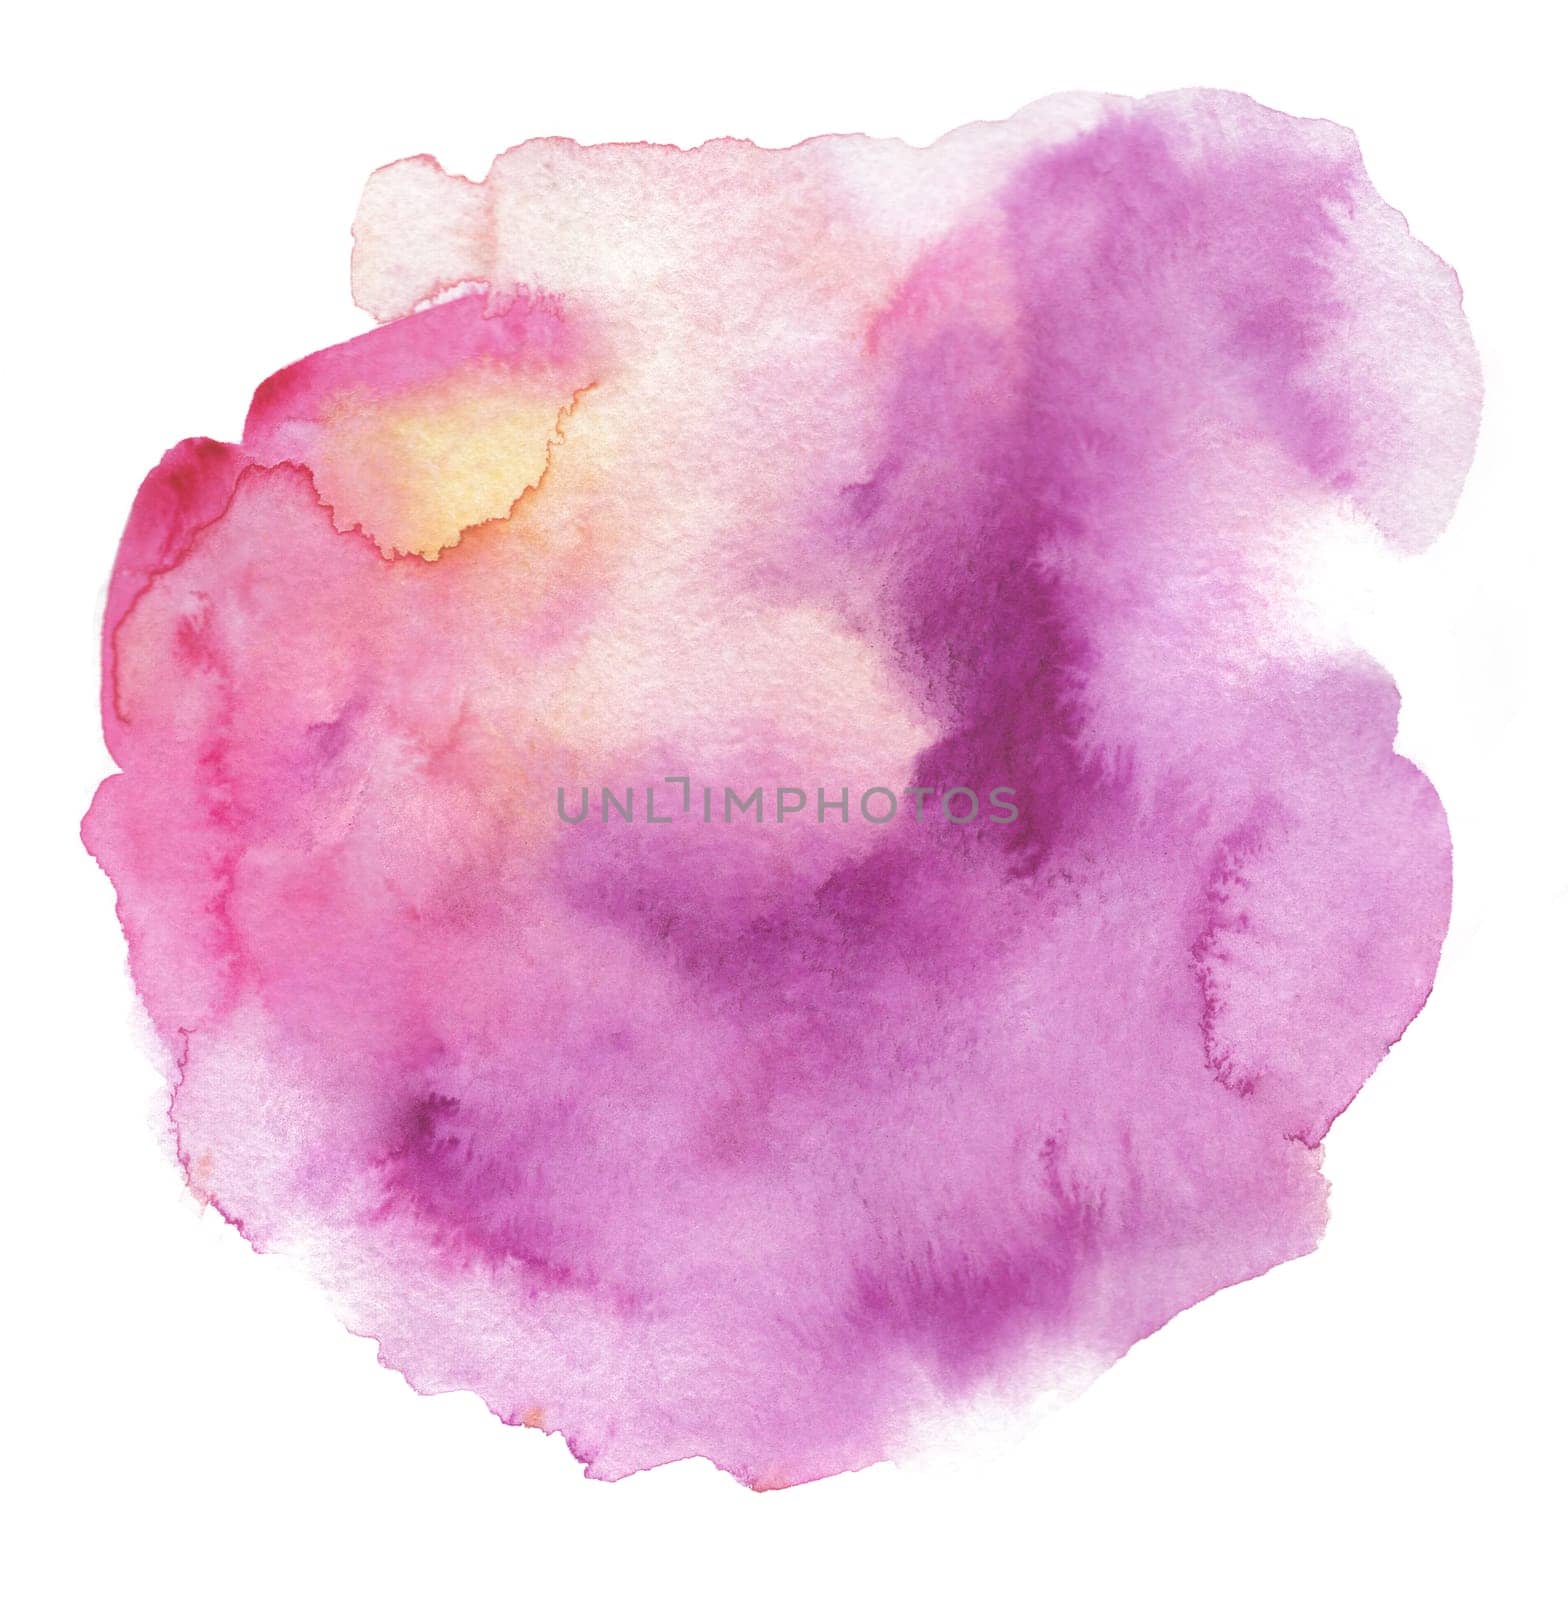 Abstract watercolor pink spot for creating backgrounds and designs by MarinaVoyush